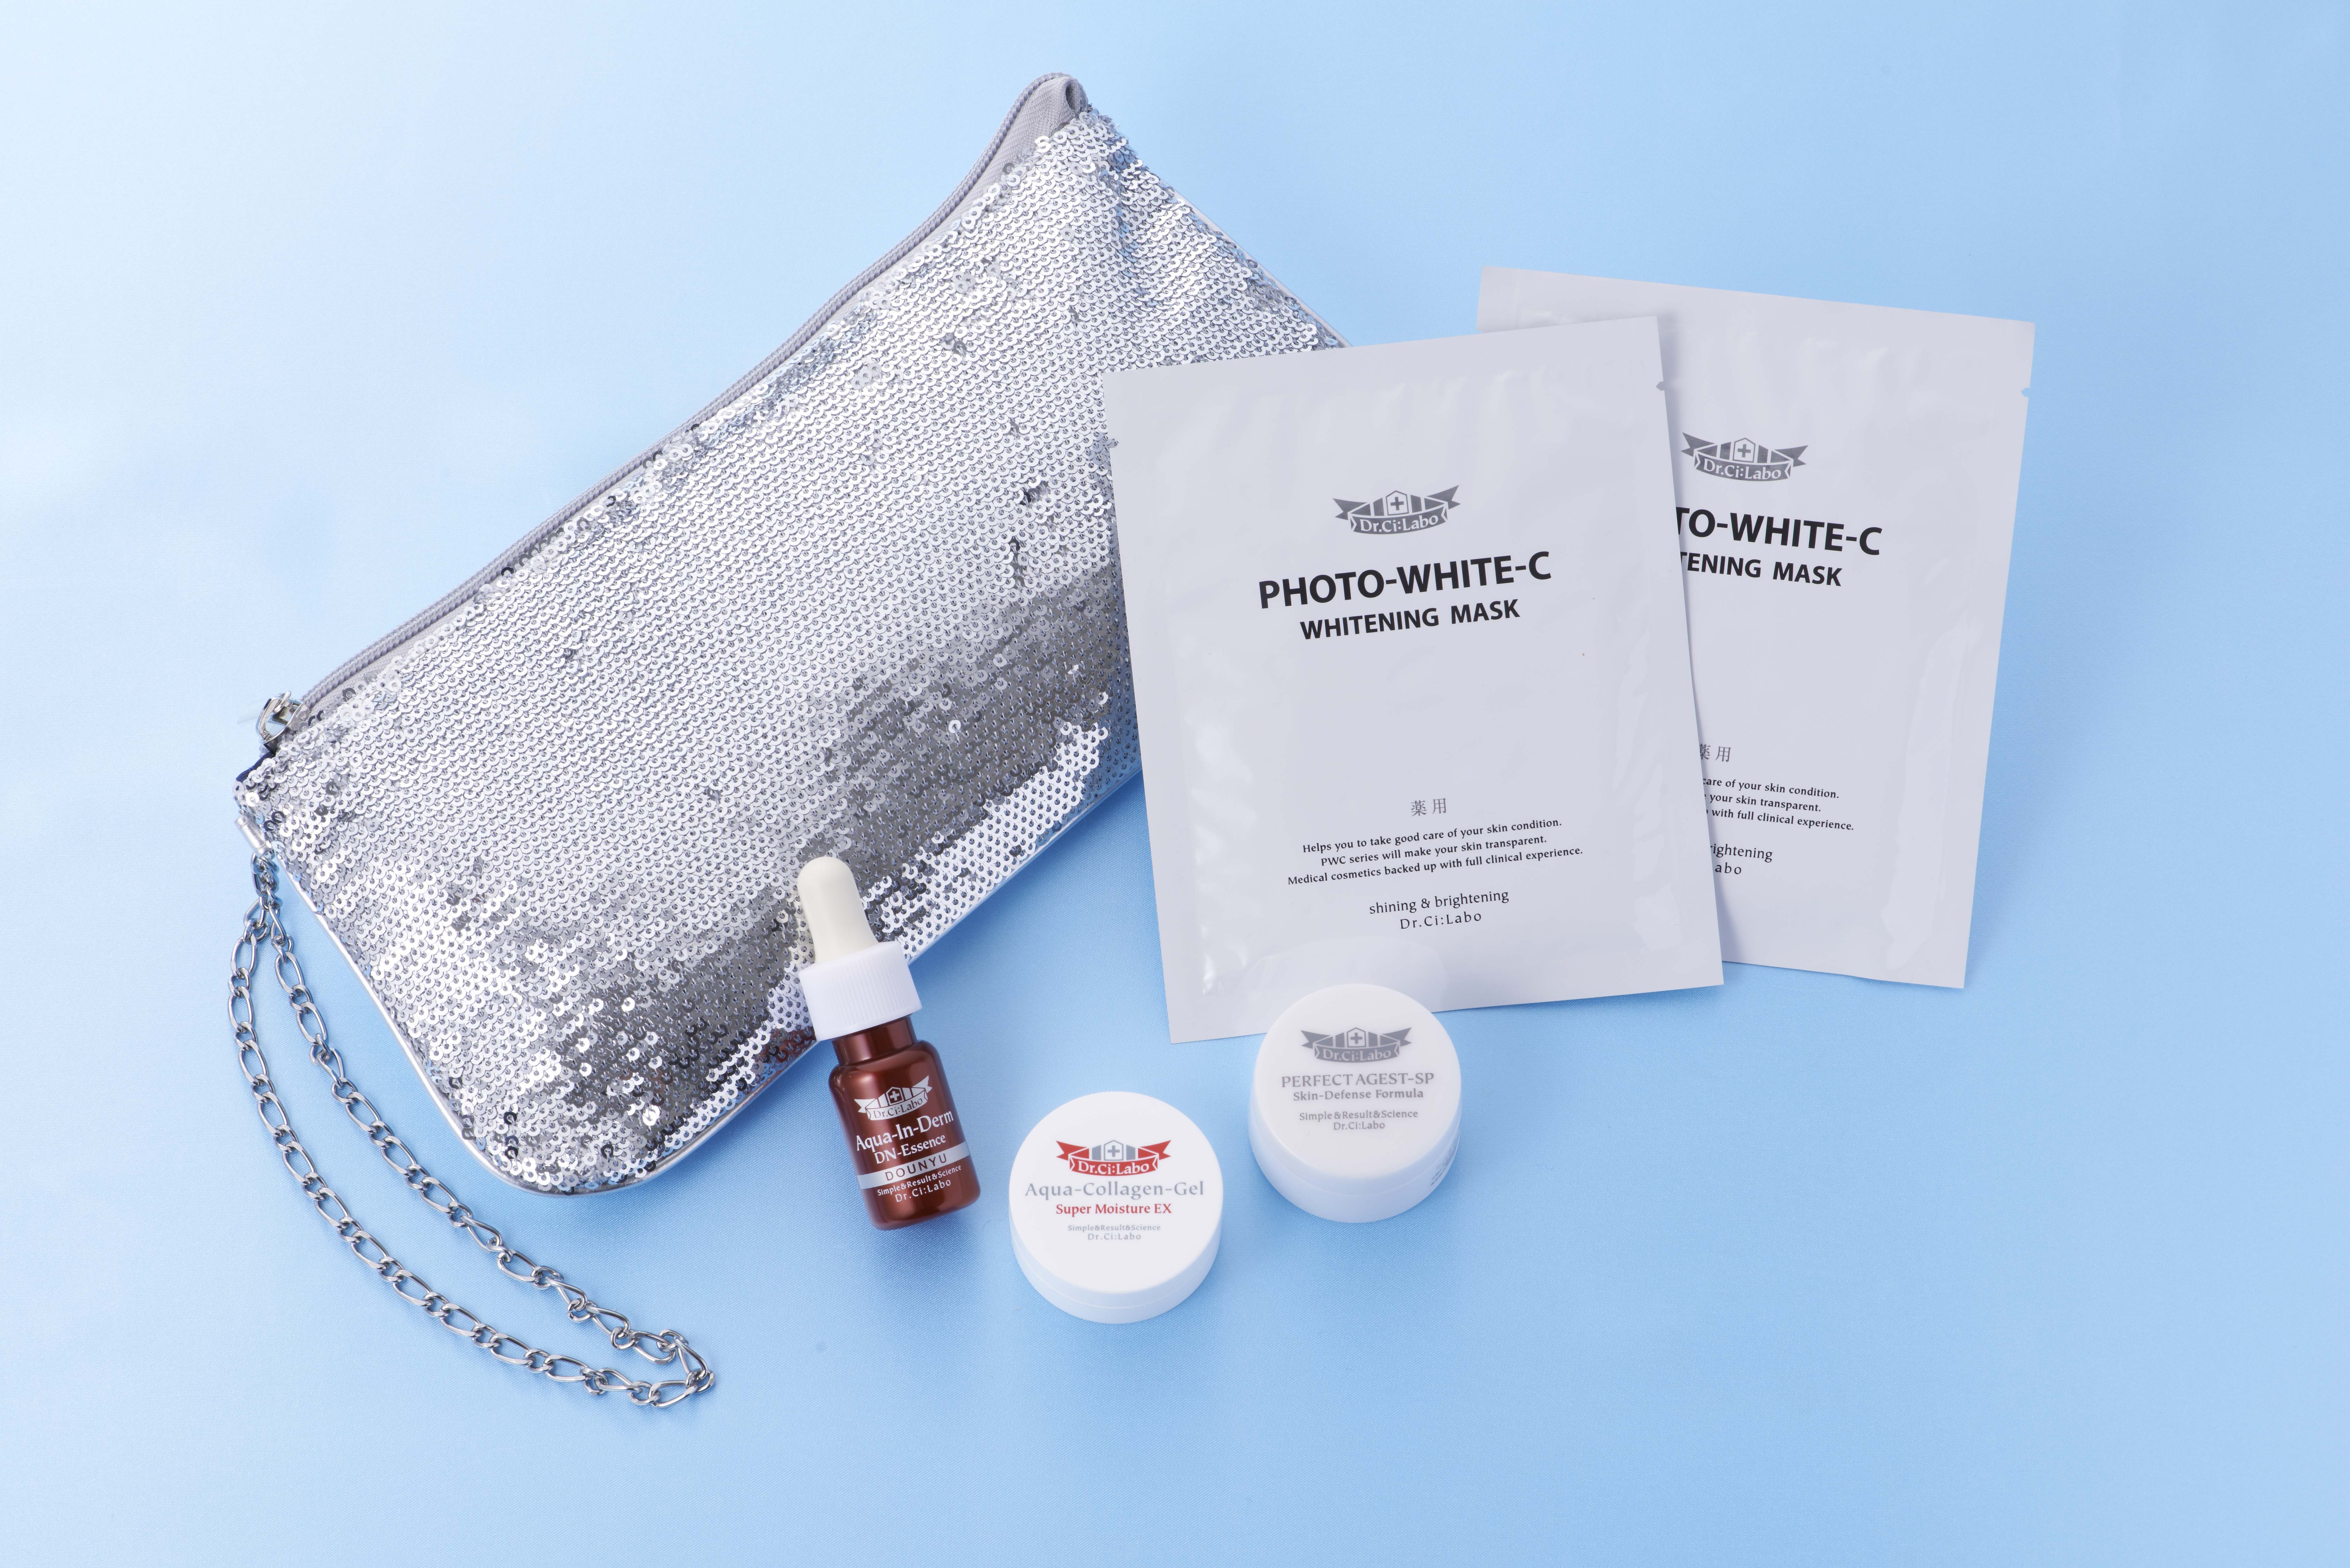 For a limited time only, customers who purchase the full-size Aqua-Collagen-Gel Super Moisture EX product ($107 for 120 g/4.23 oz) will receive a sample kit with six products and a gorgeous silver clu